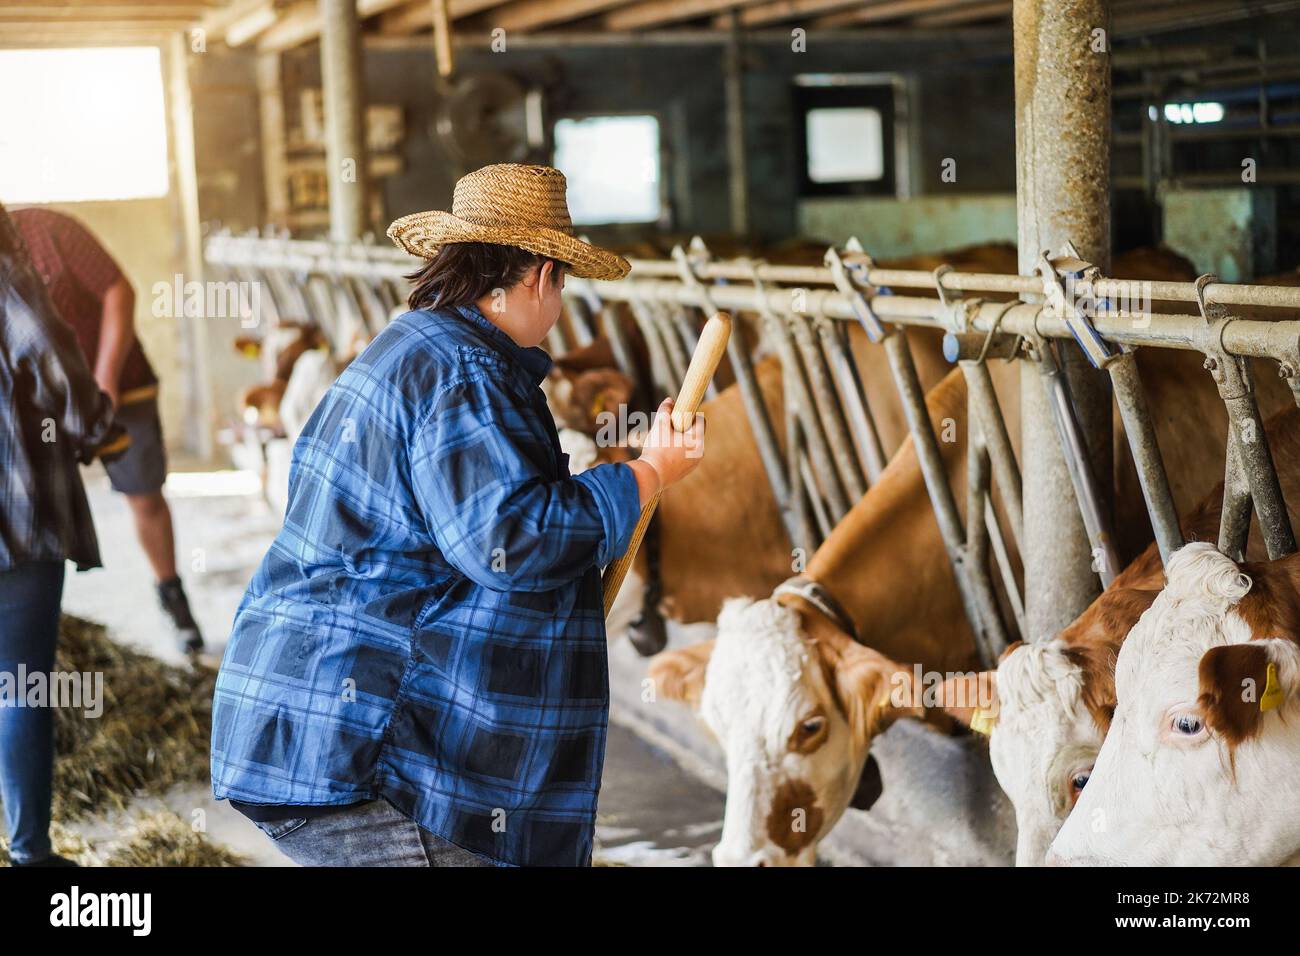 Young curvy farmer woman working inside cowshed - Focus on hat Stock Photo